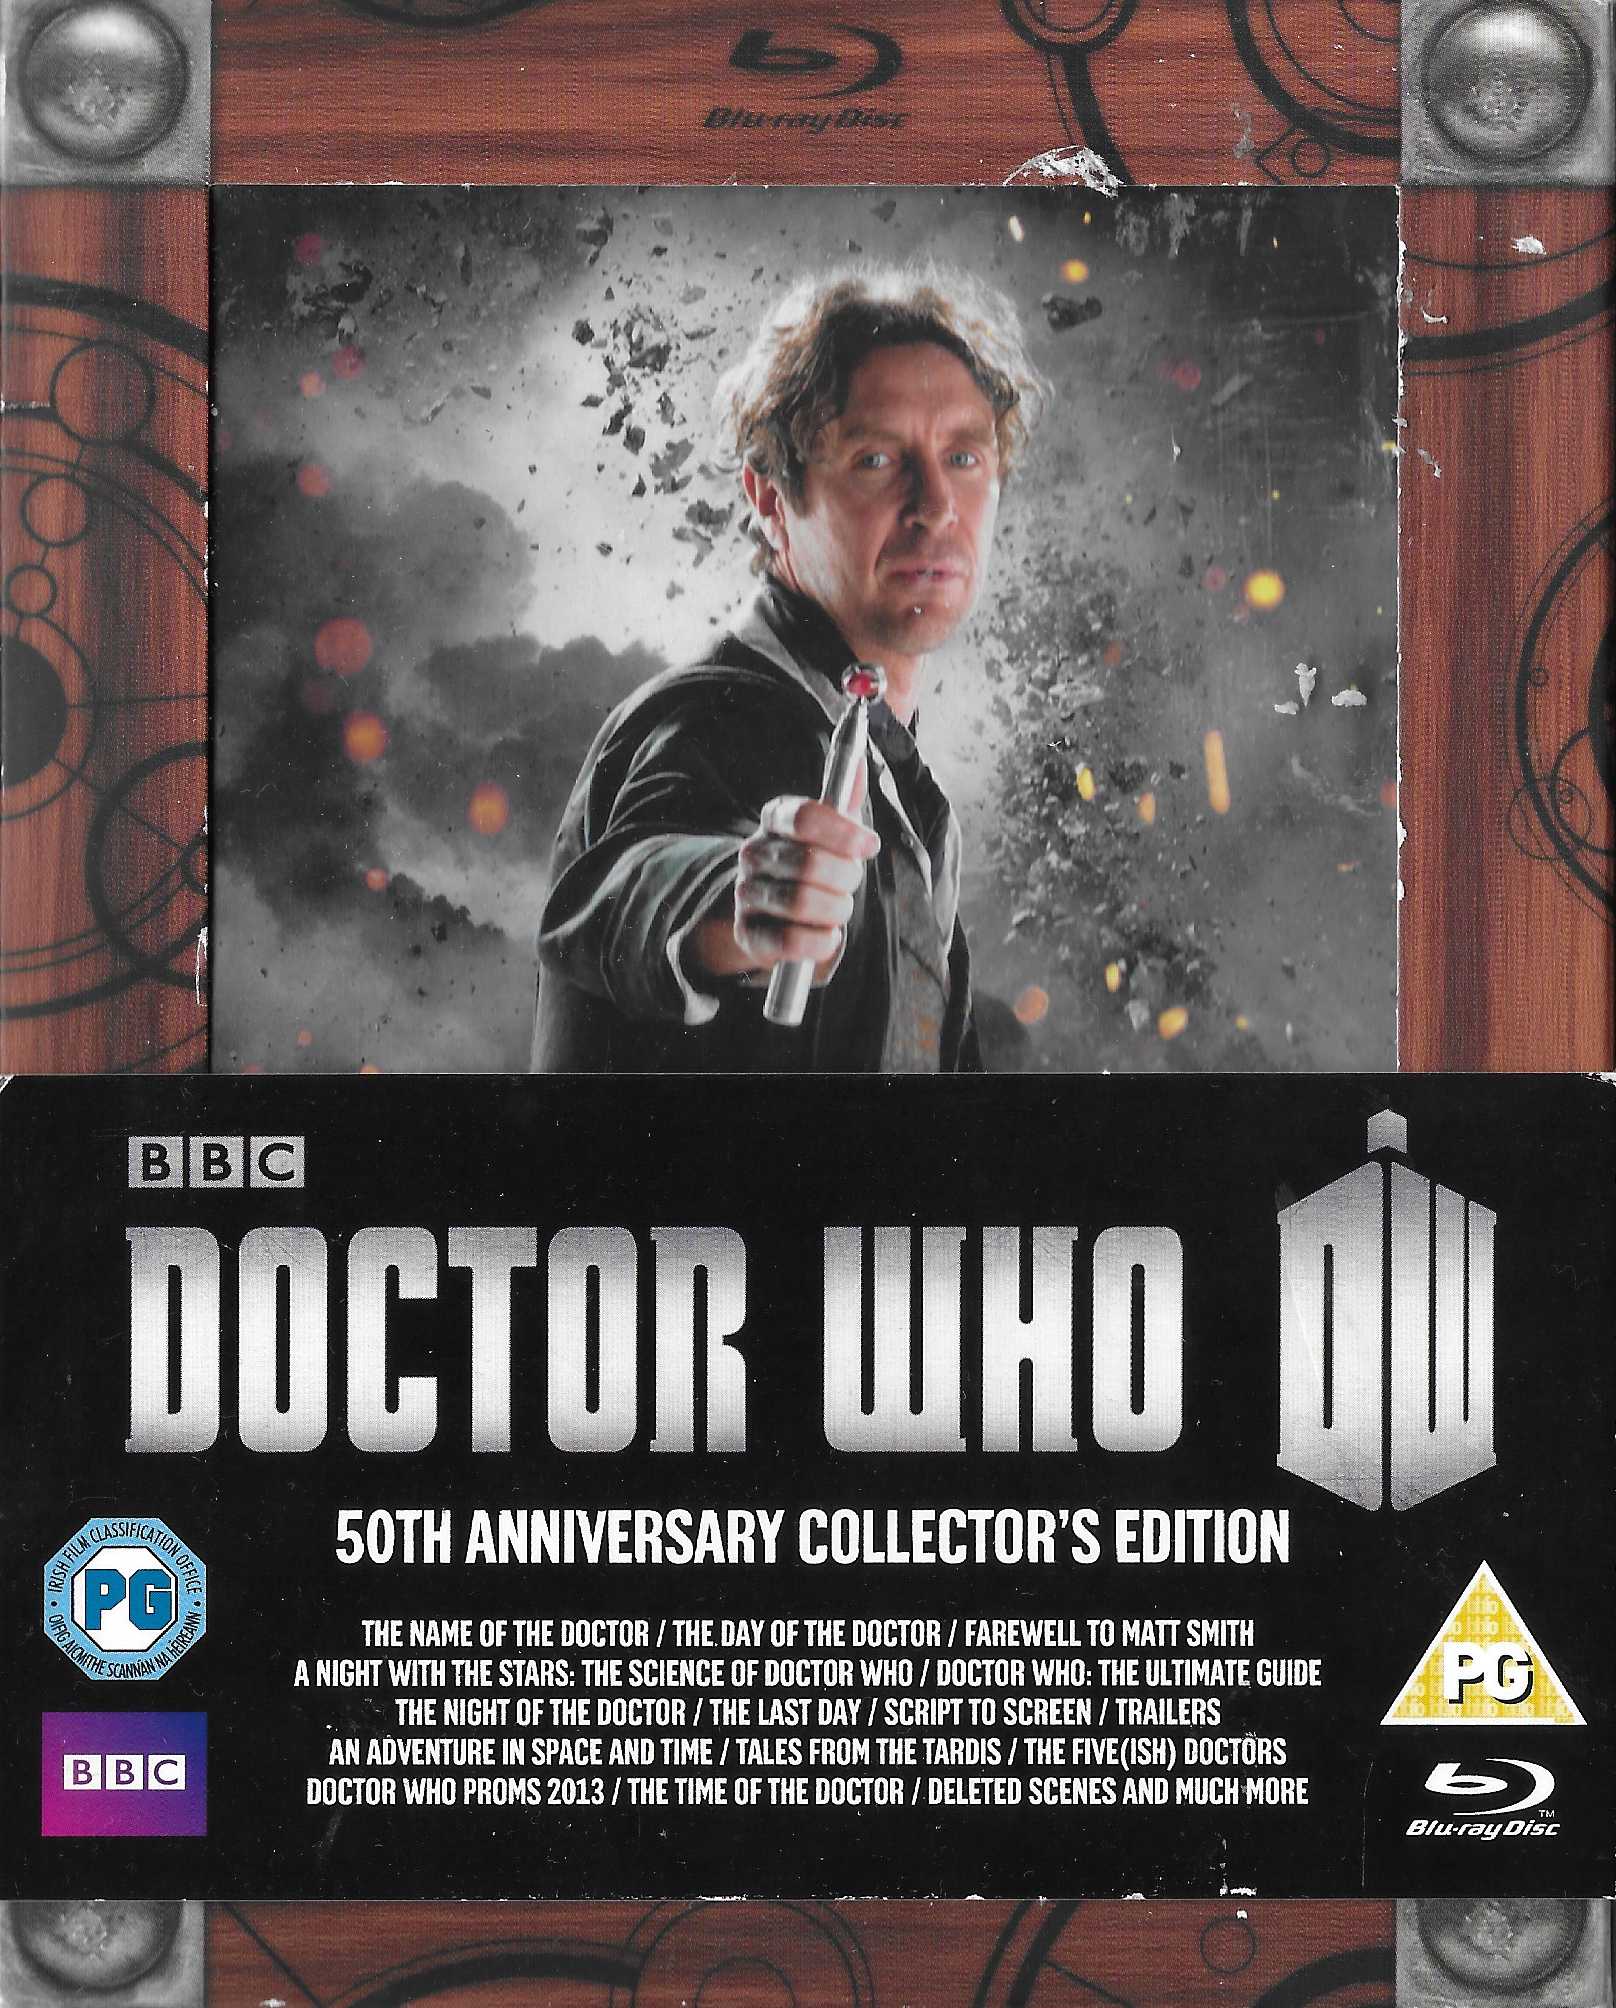 Picture of BBCBD 0271 Doctor Who - 50th anniversary collector's edition by artist Steven Moffat / Mark Gatiss from the BBC blu-rays - Records and Tapes library